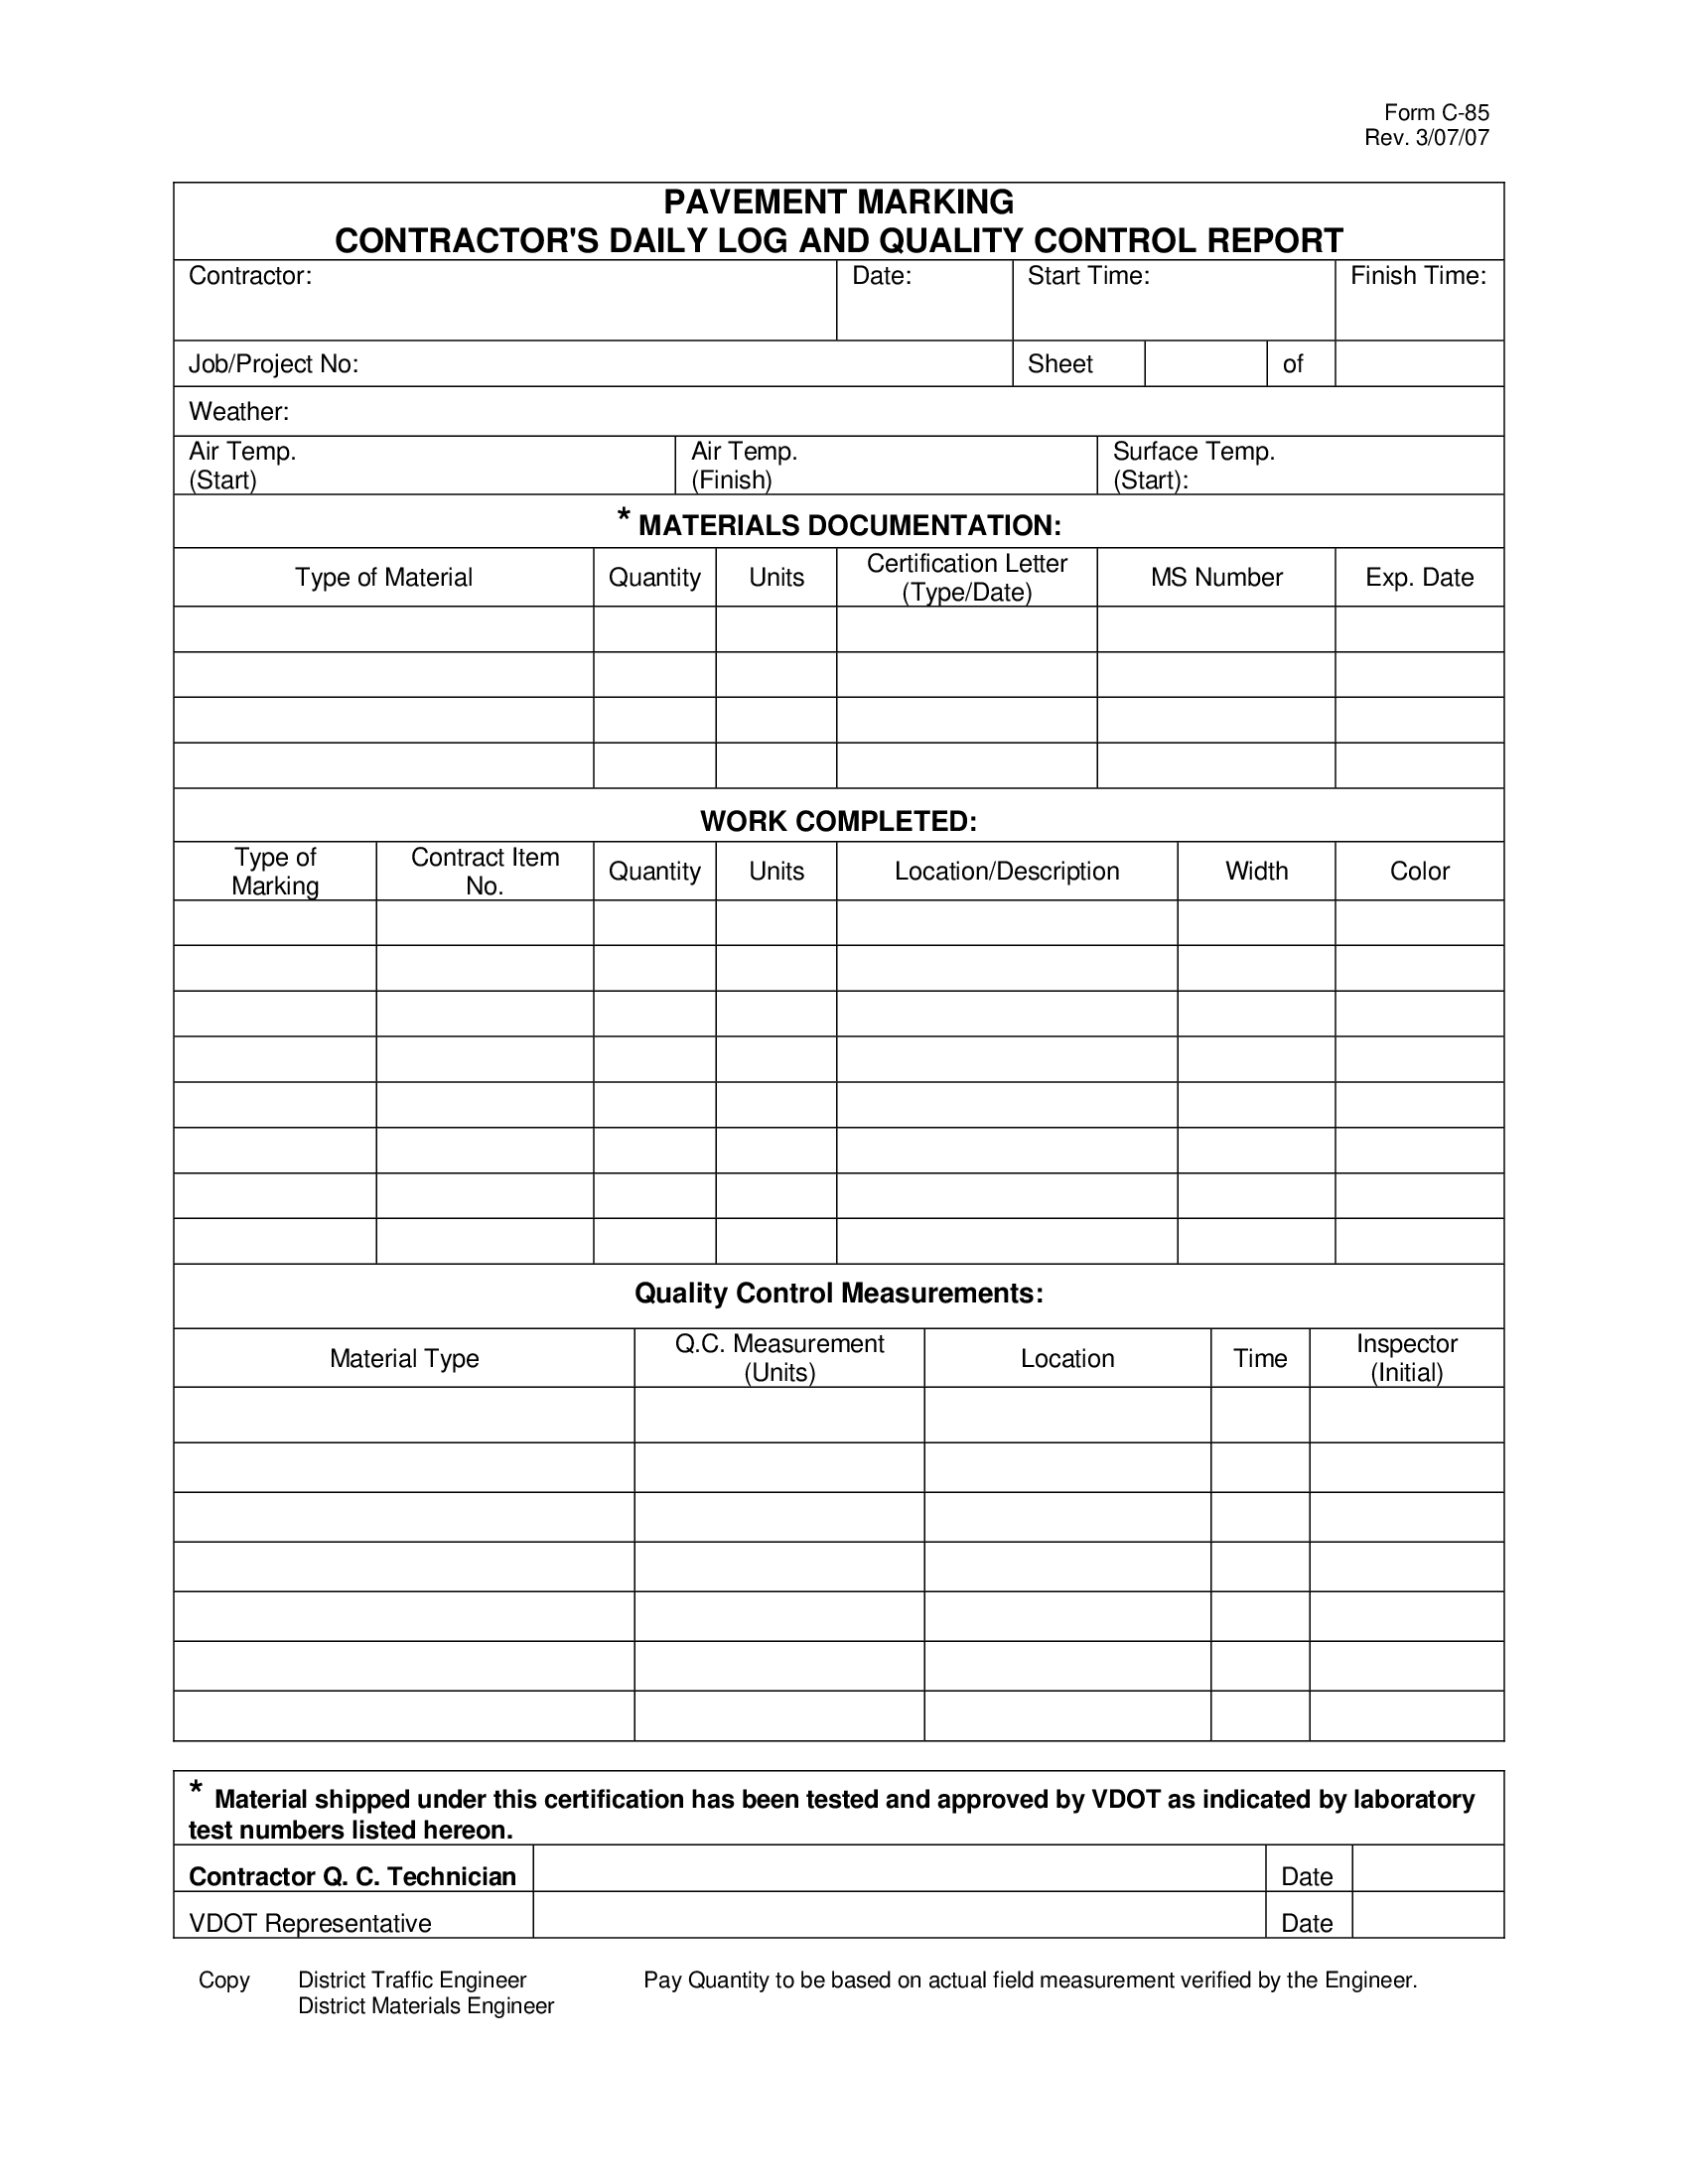 VDOT Form C-85. Pavement Marking Contractor's Daily Log and Quality ...